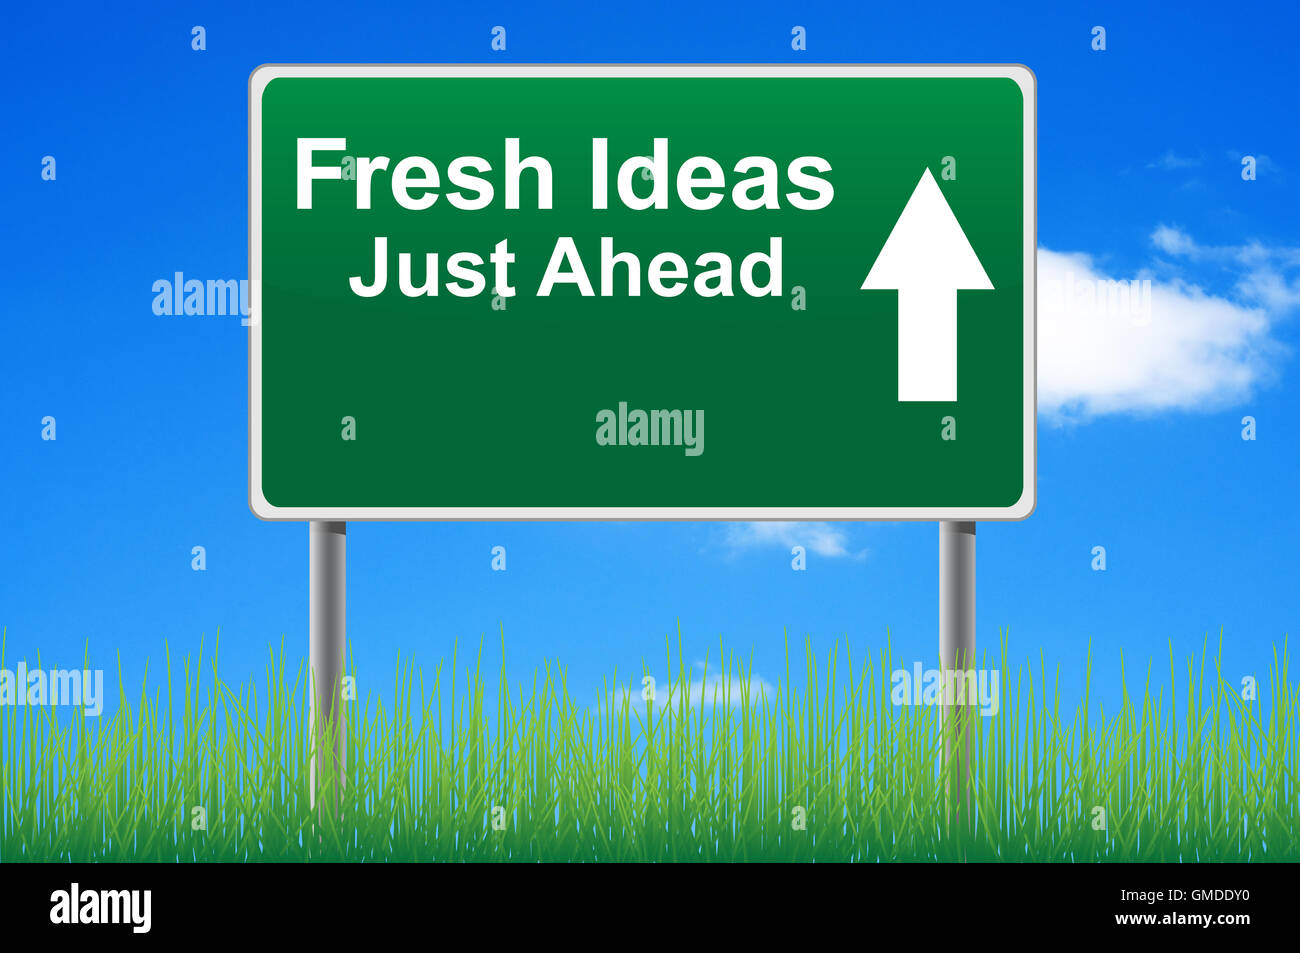 Fresh ideas road sign on sky background, grass underneath. Stock Photo